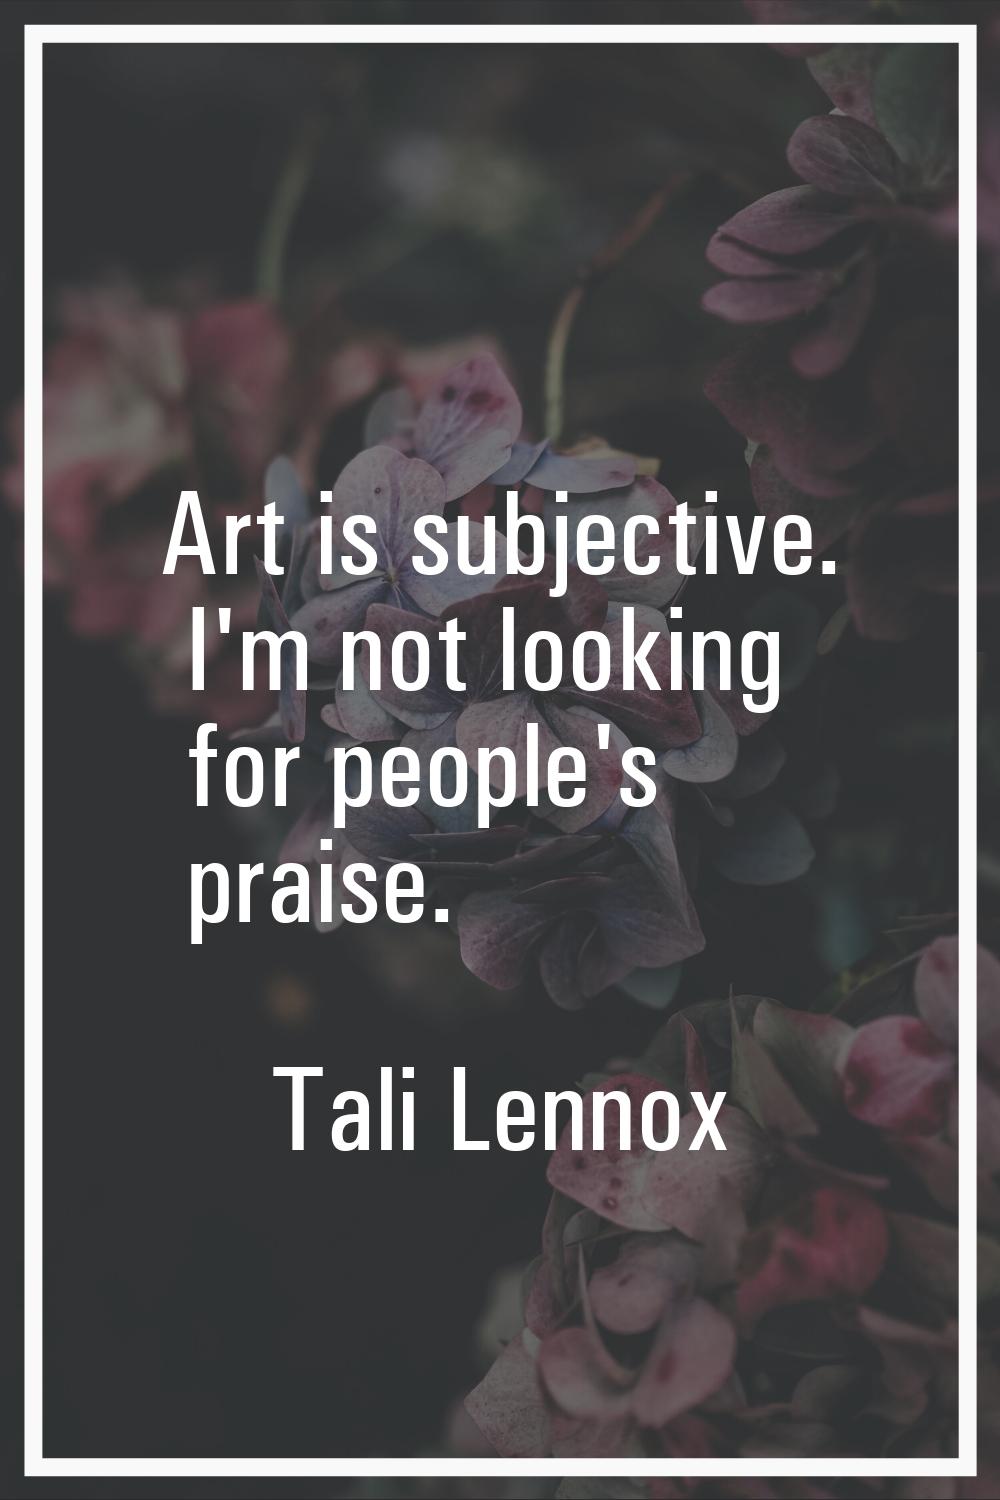 Art is subjective. I'm not looking for people's praise.